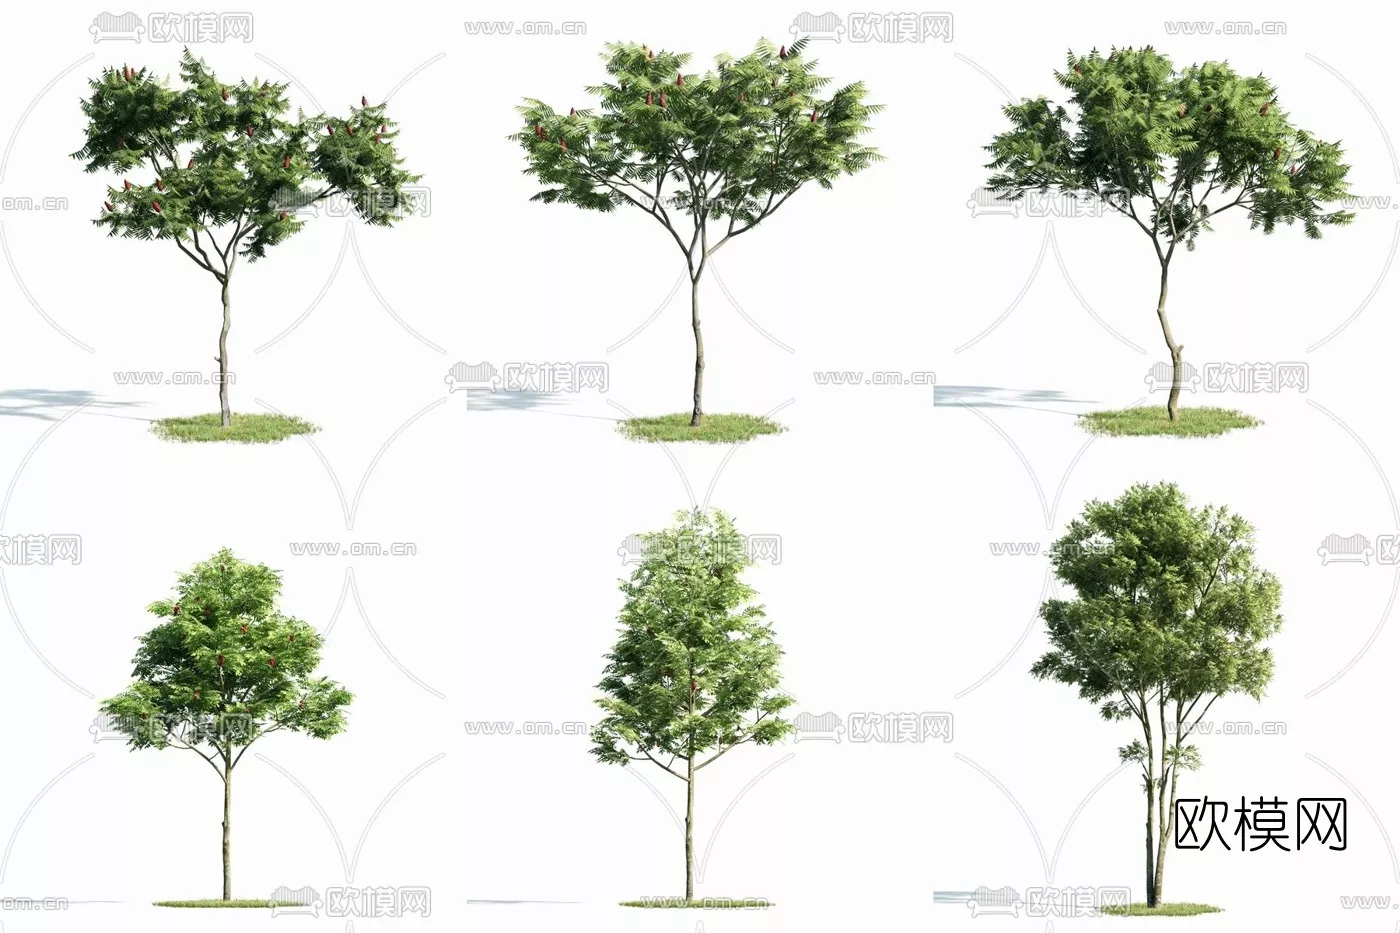 MODERN TREE - SKETCHUP 3D MODEL - VRAY OR ENSCAPE - ID15303